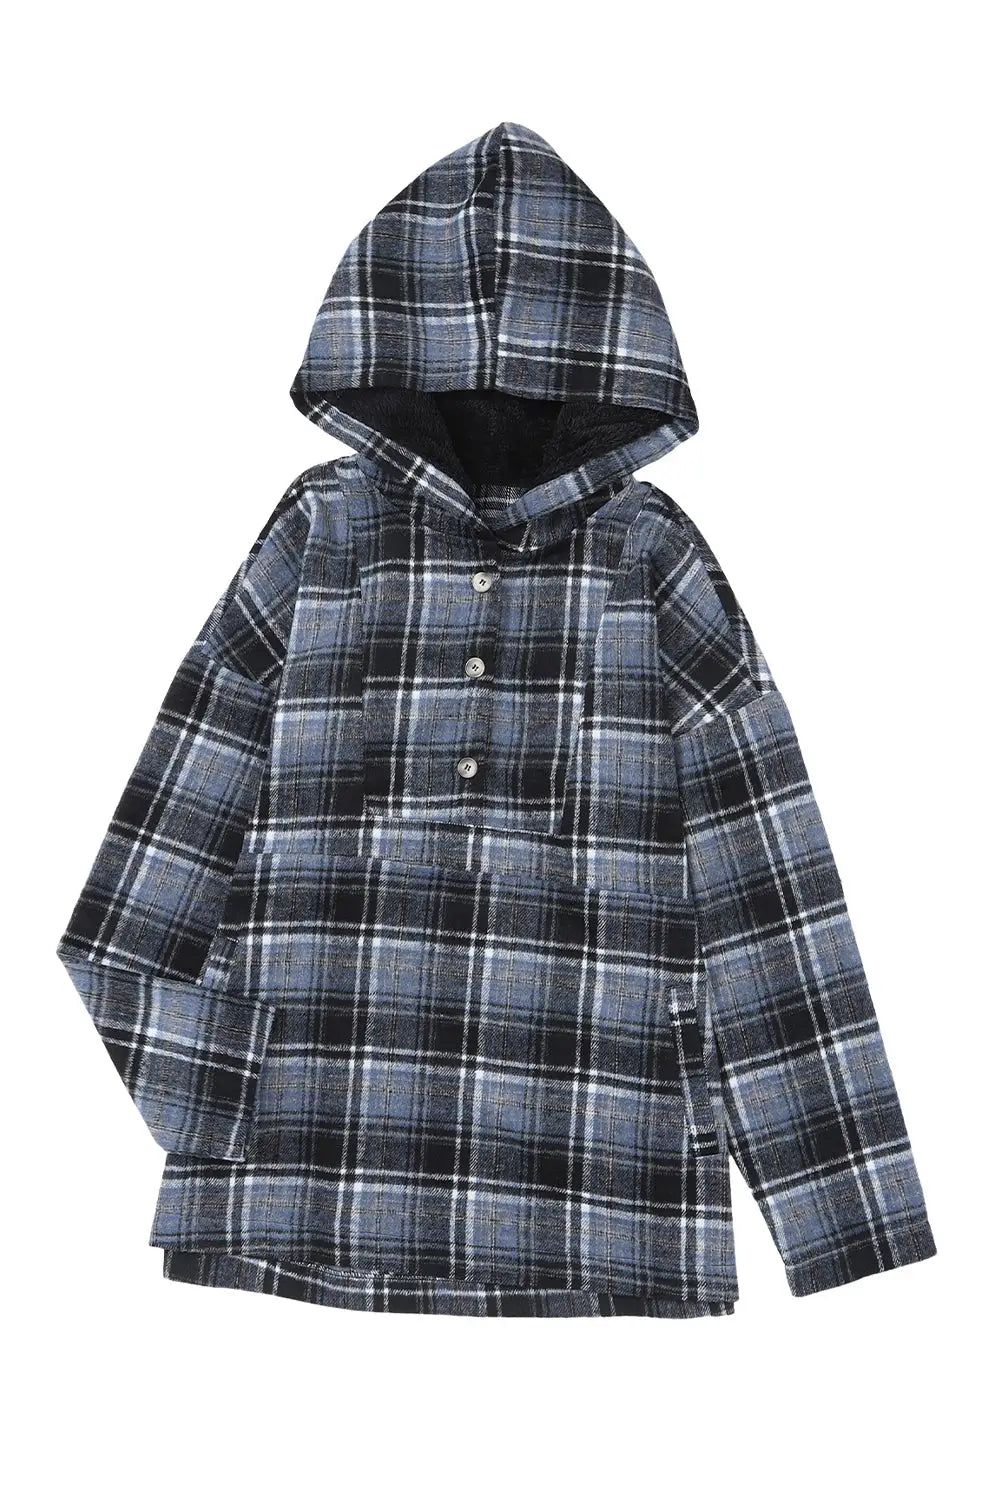 White plaid button neck pocketed pullover hoodie - tops